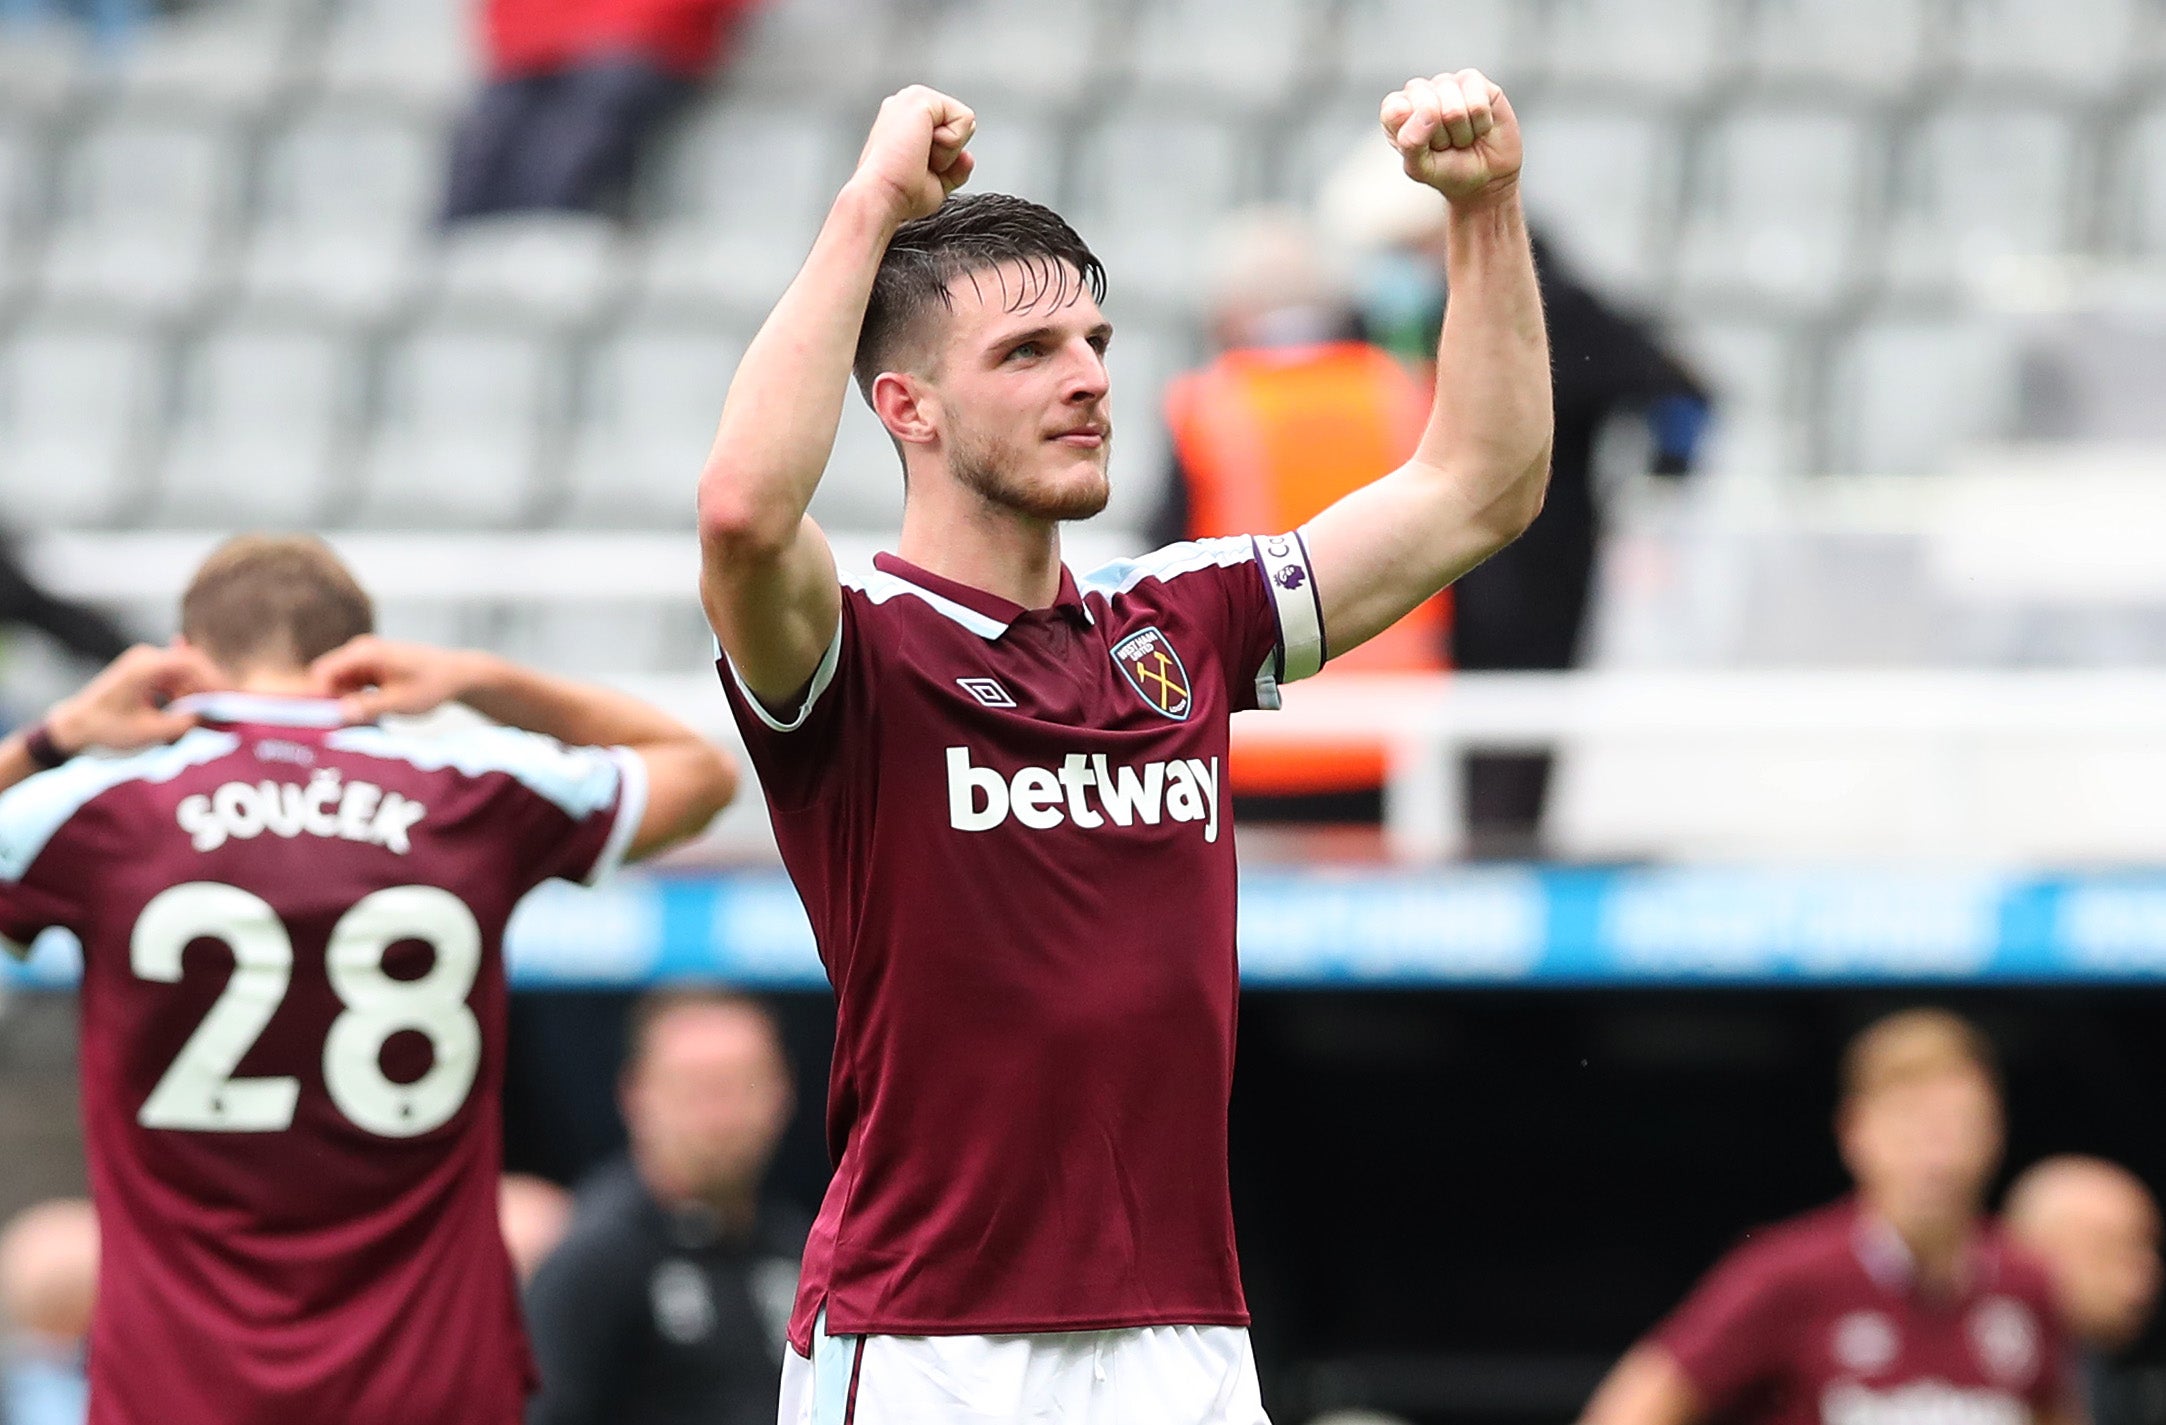 Declan Rice has been linked with a move to Manchester United or Chelsea